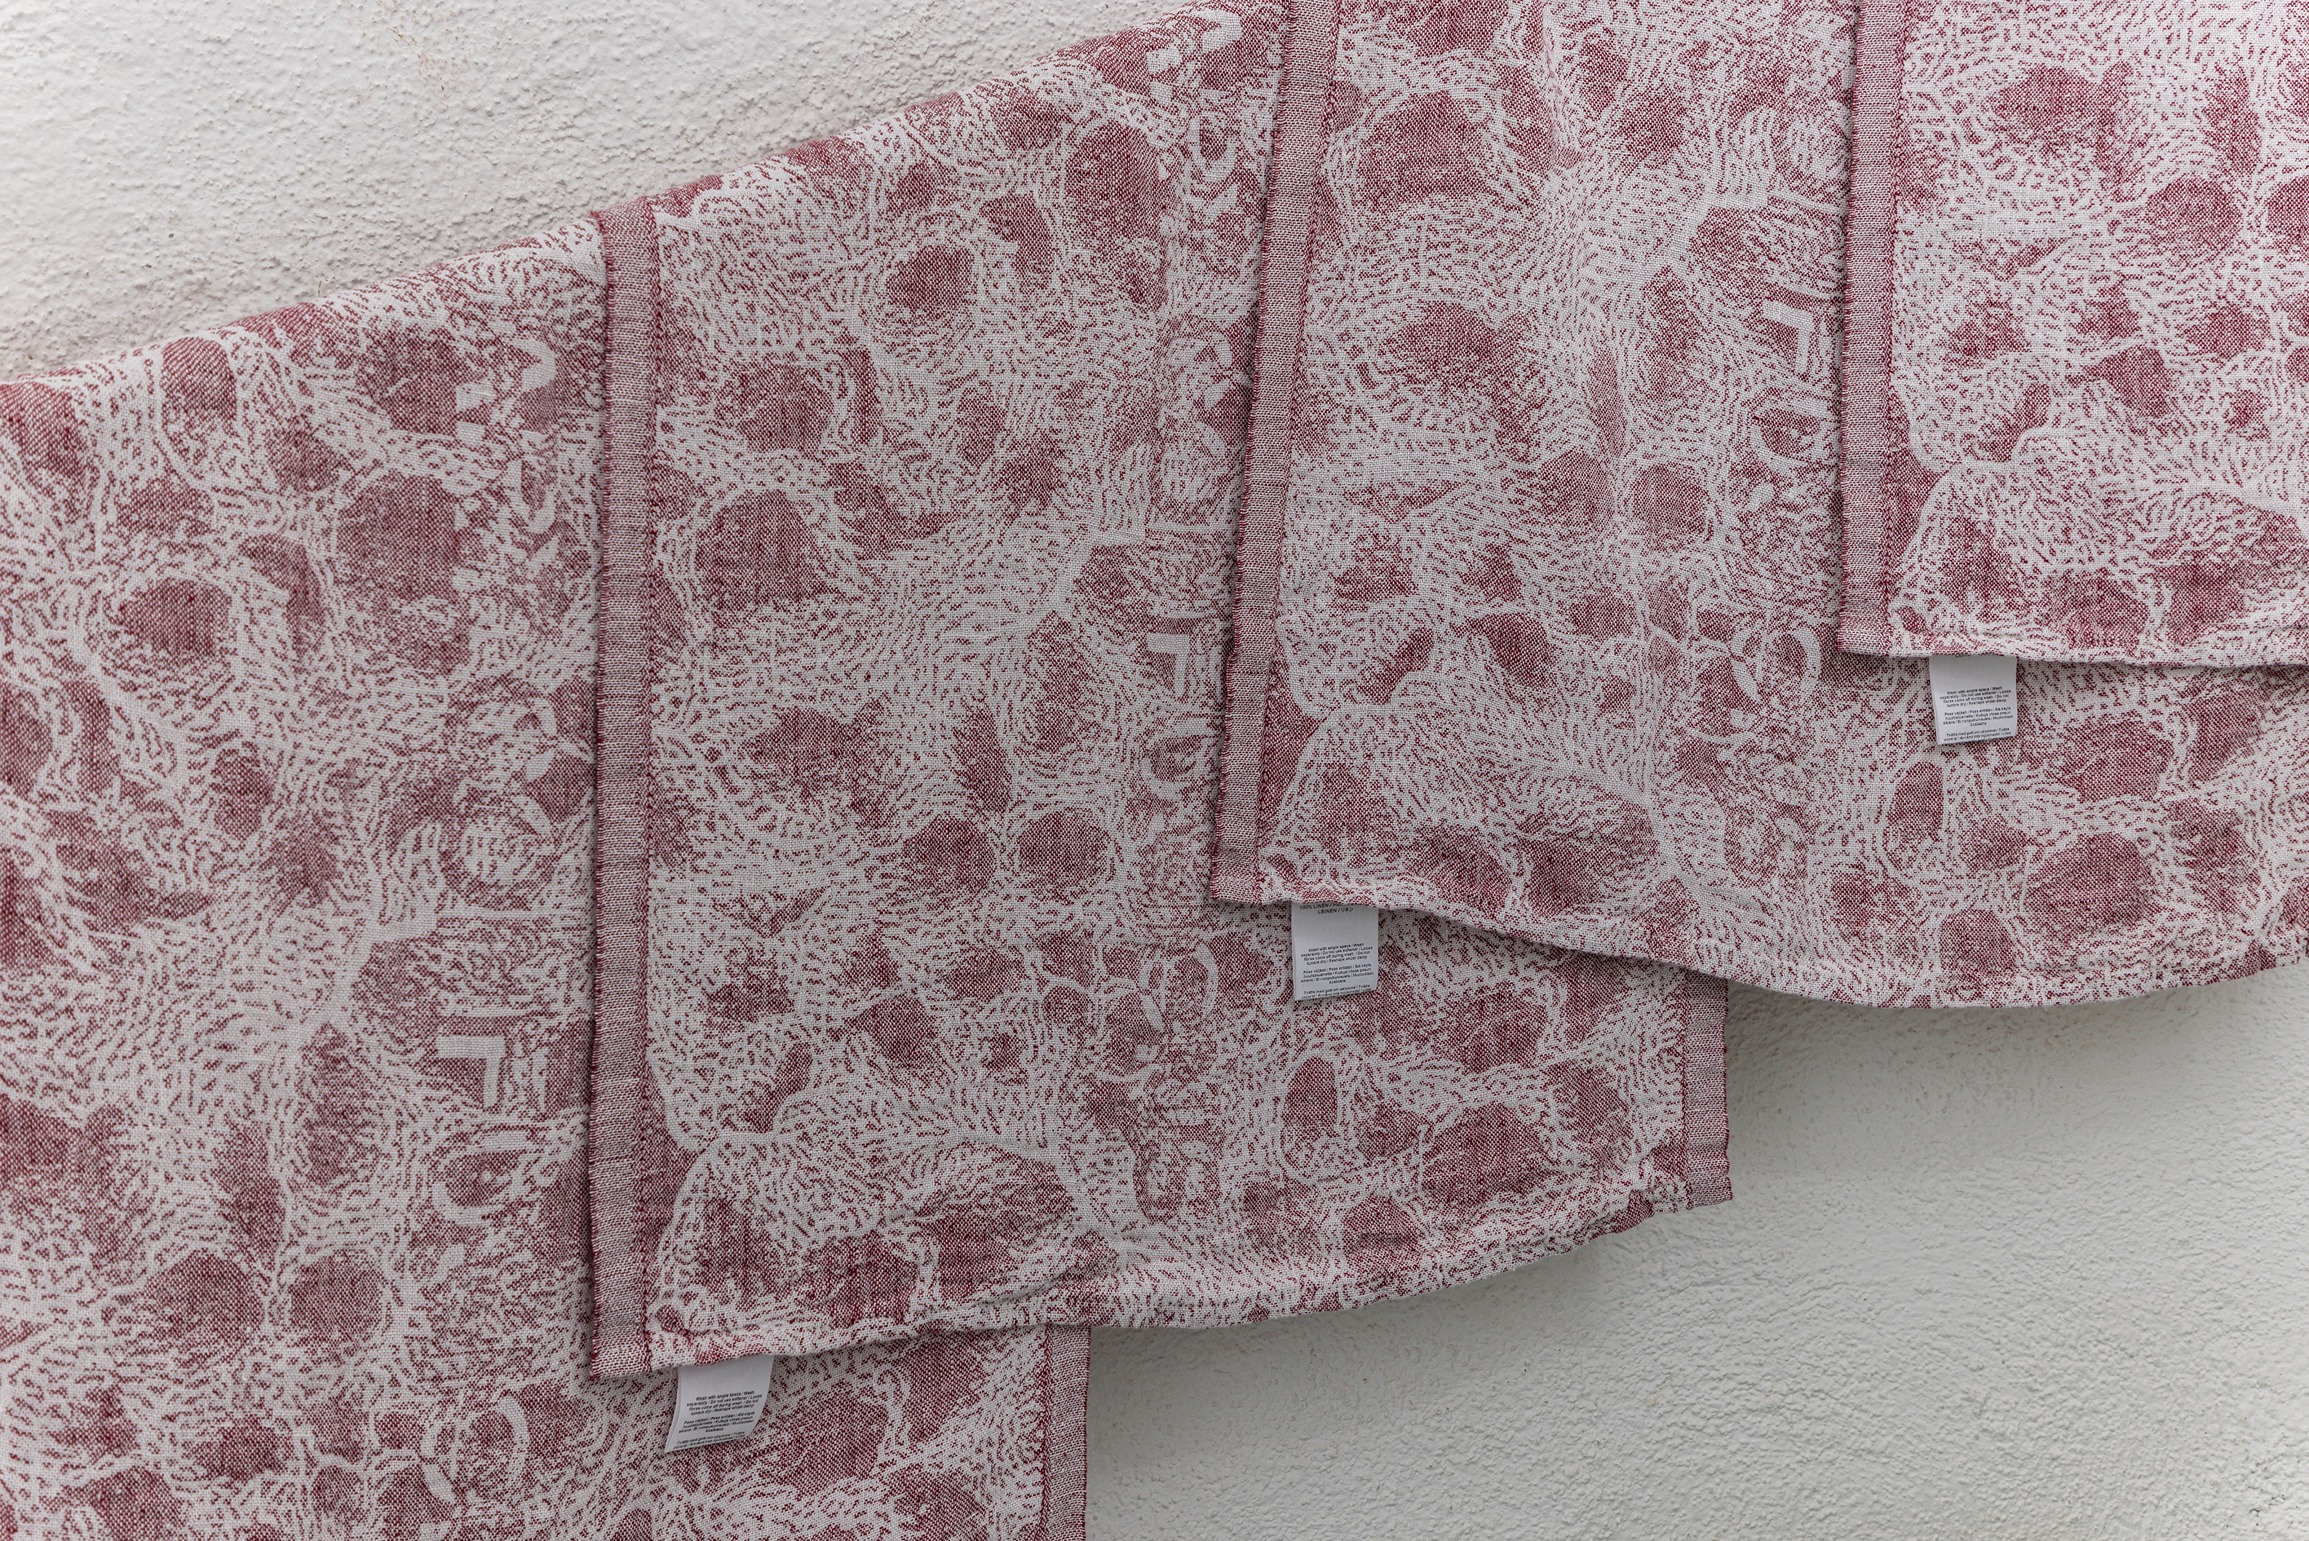 Lukas Malte Hoffmann: Capillary Confusions, 2022; 104 double woven linen towels, 480 x 700 mm